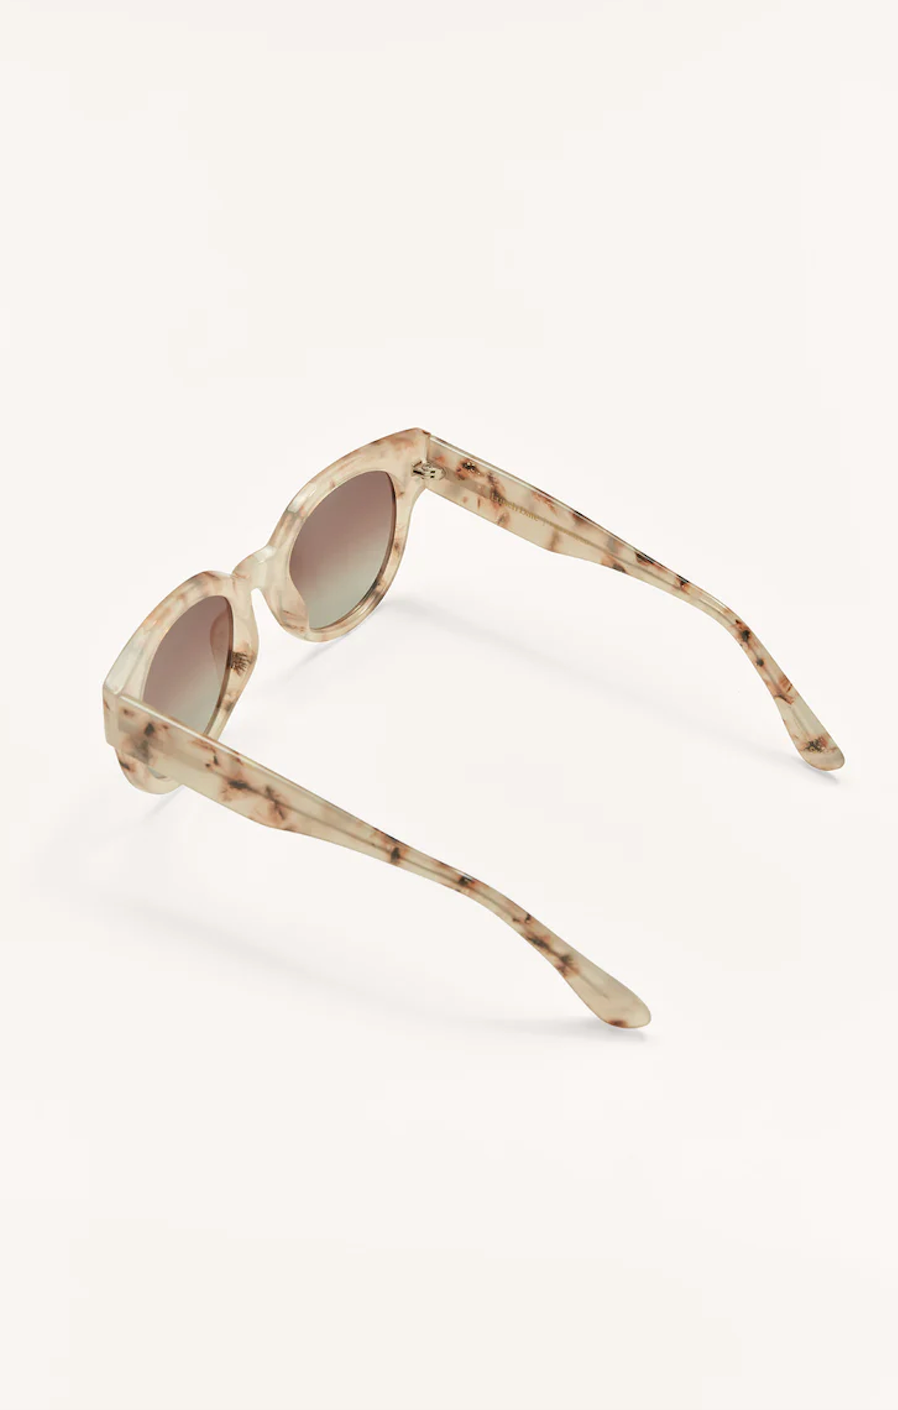 Z SUPPLY LUNCH DATE SUNGLASSES IN BLUSH PINK GRADIENT